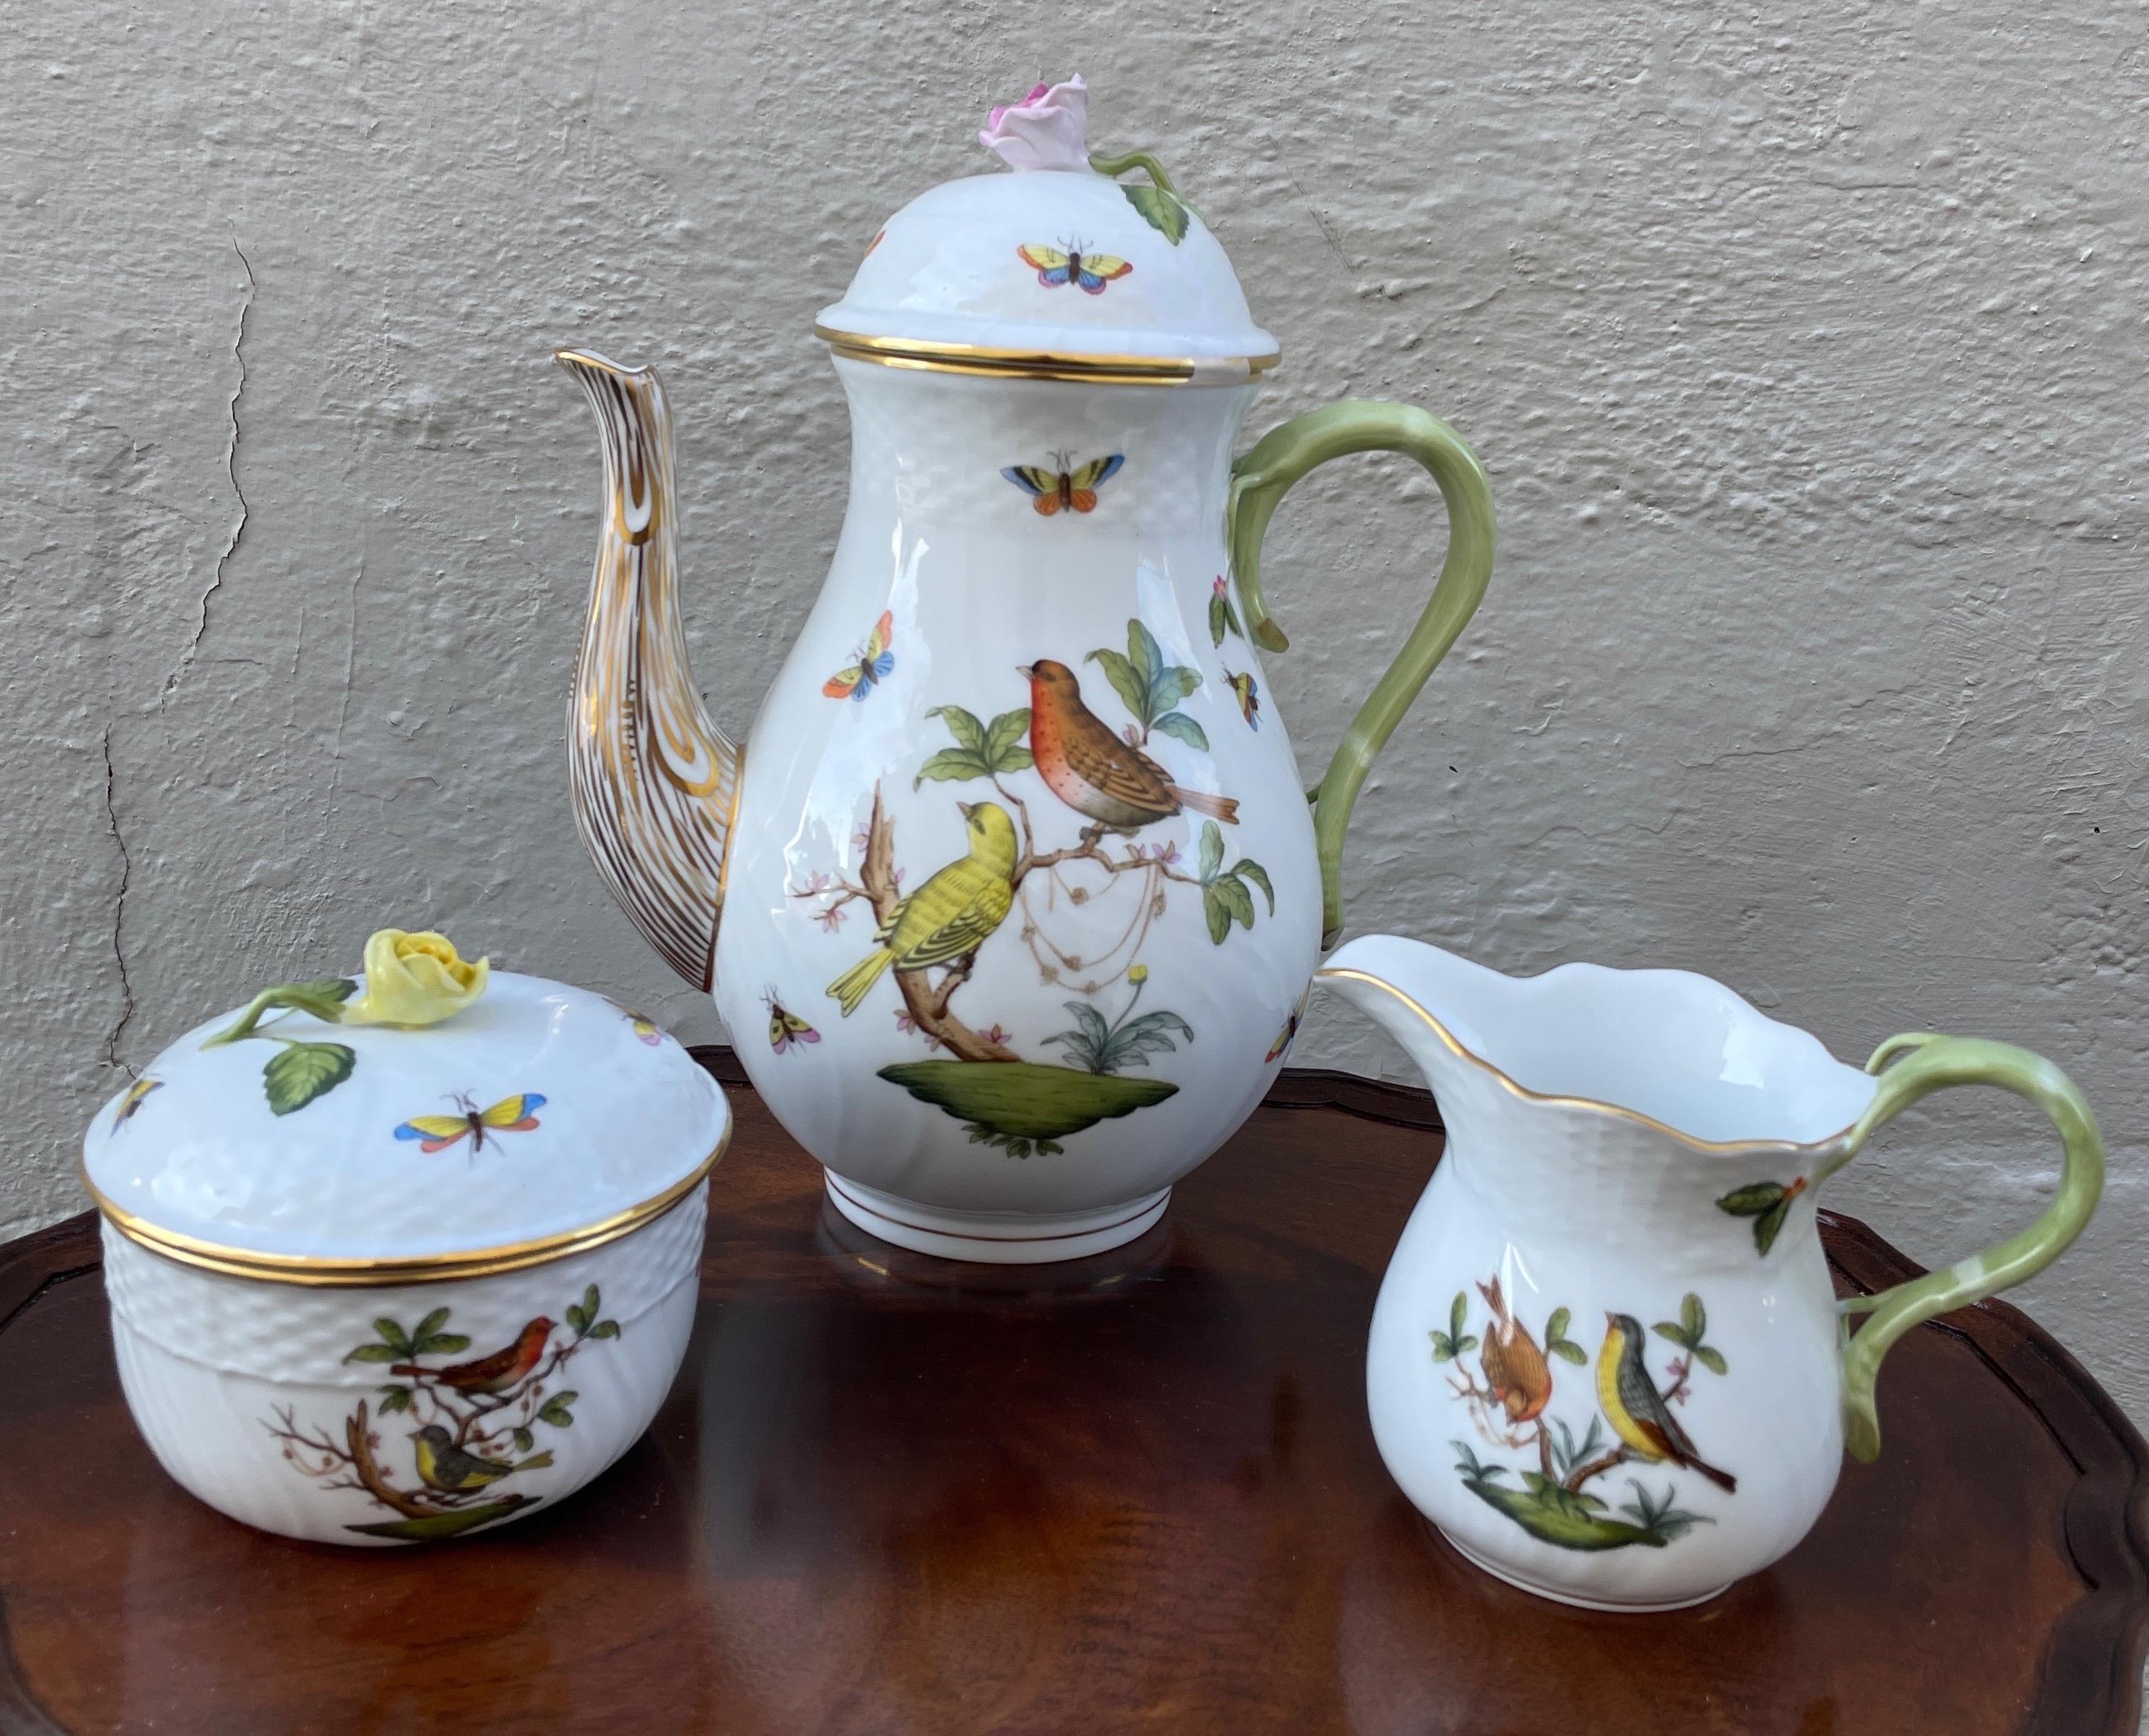 Herend Rothschild bird pattern large coffee pot with matching creamer & sugar bowl. This beautiful pattern consists of birds, butterflies & flora. In excellent, like new condition.